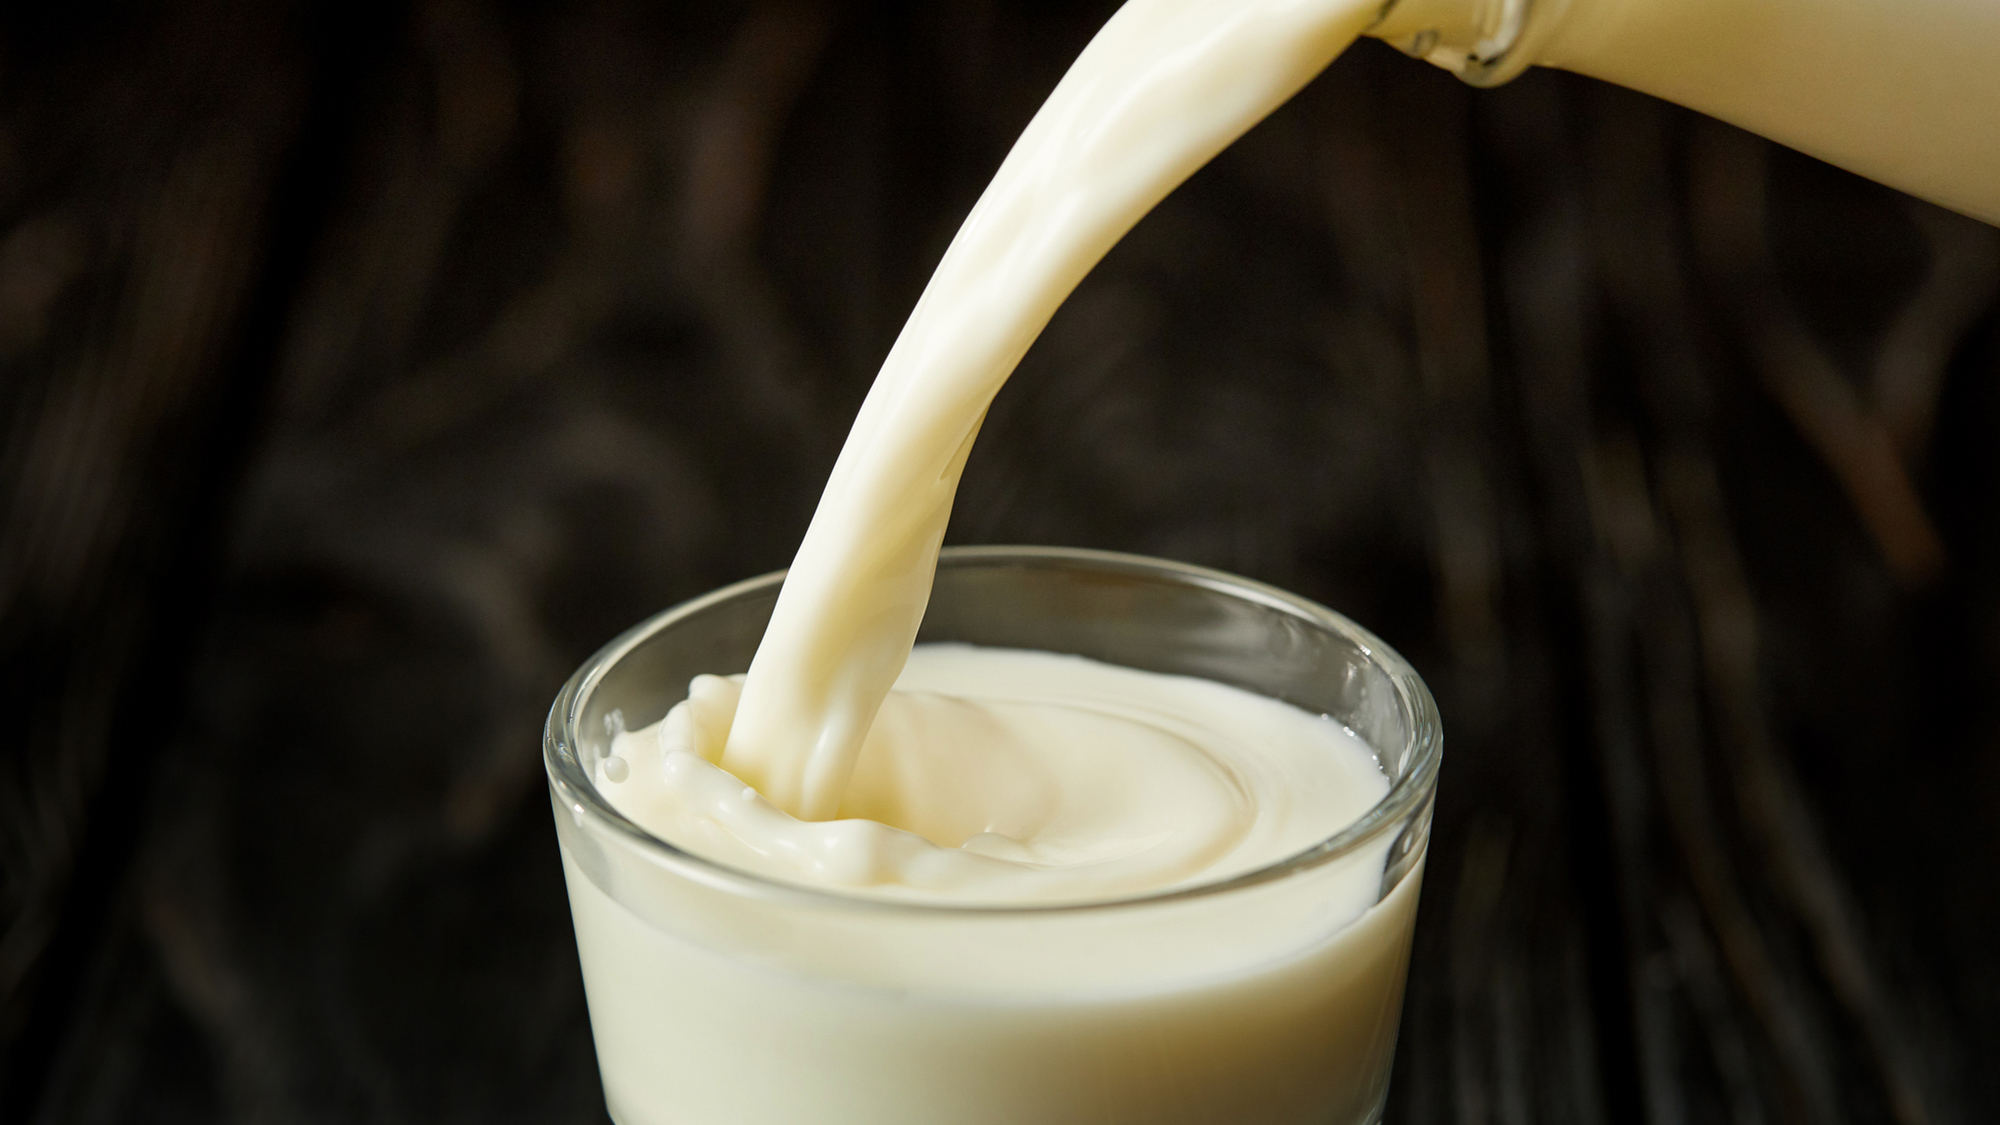 Why you shouldn't drink raw milk